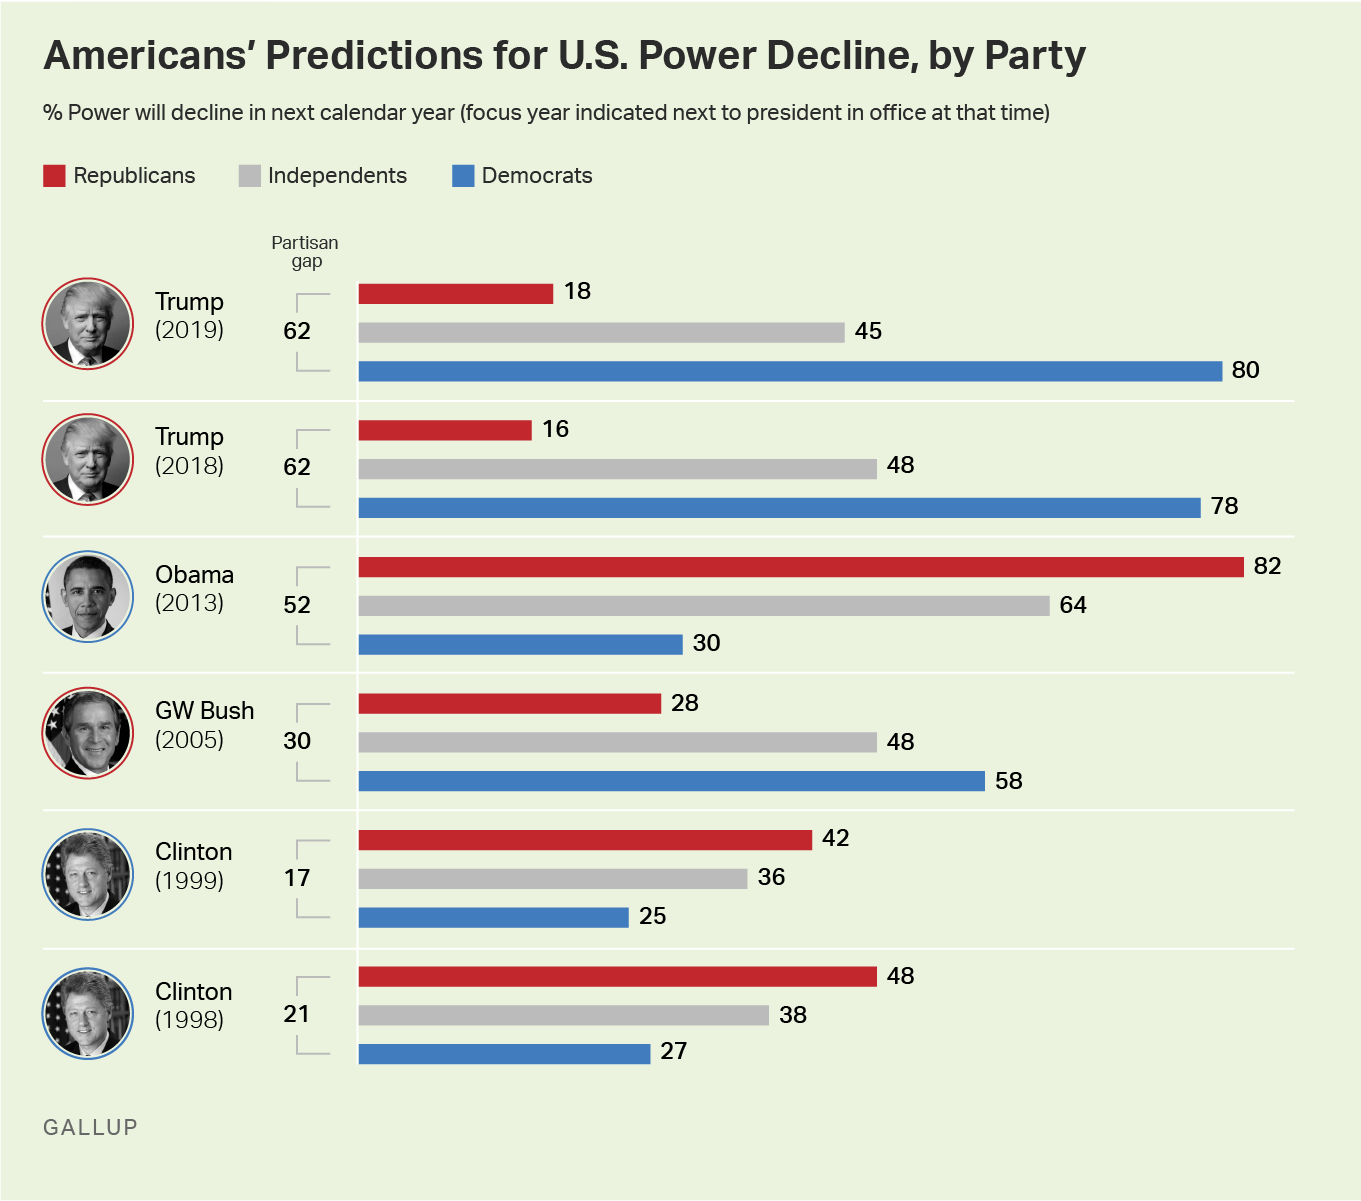 Bar graph. Americans’ perceptions of what will happen to U.S. power in the next year, by key groups, from 1998 to 2018.